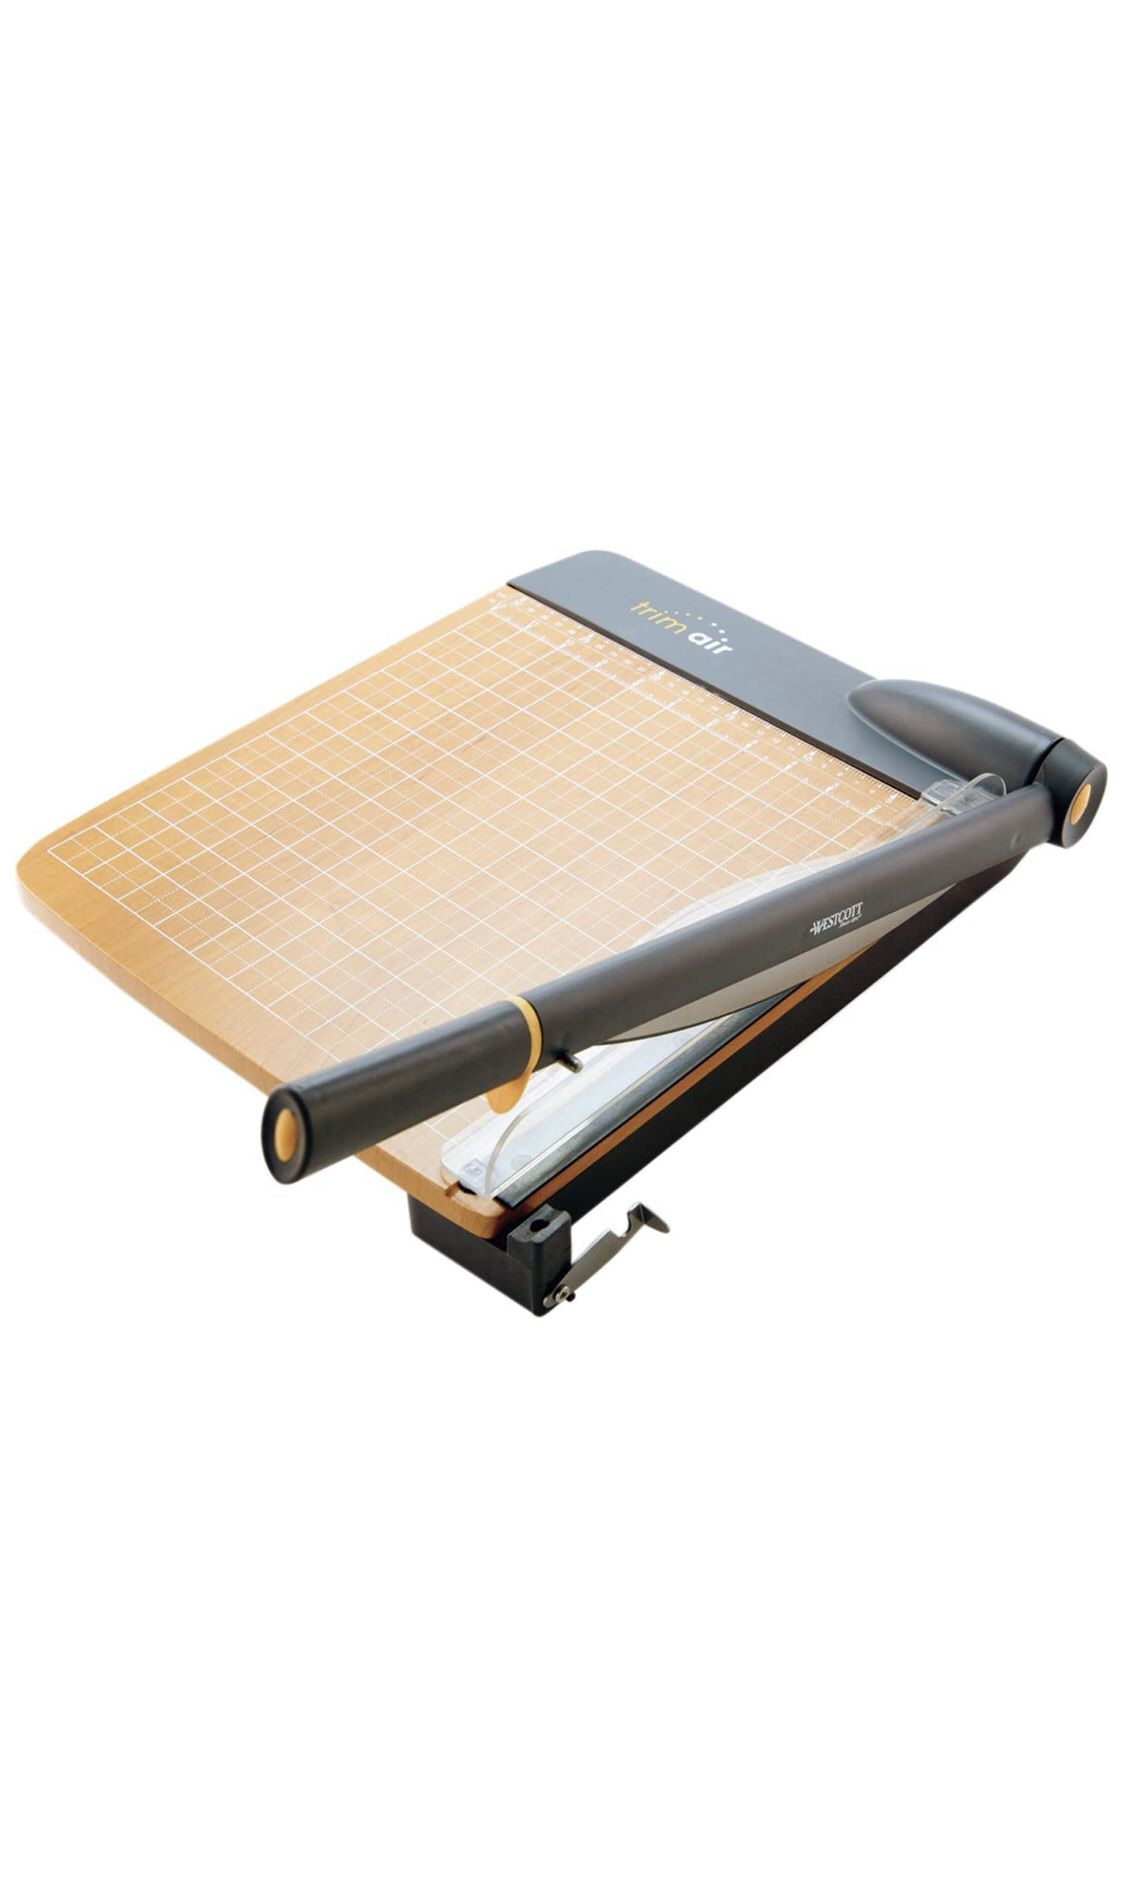 Paper trimmer. Trim up to 30 pages